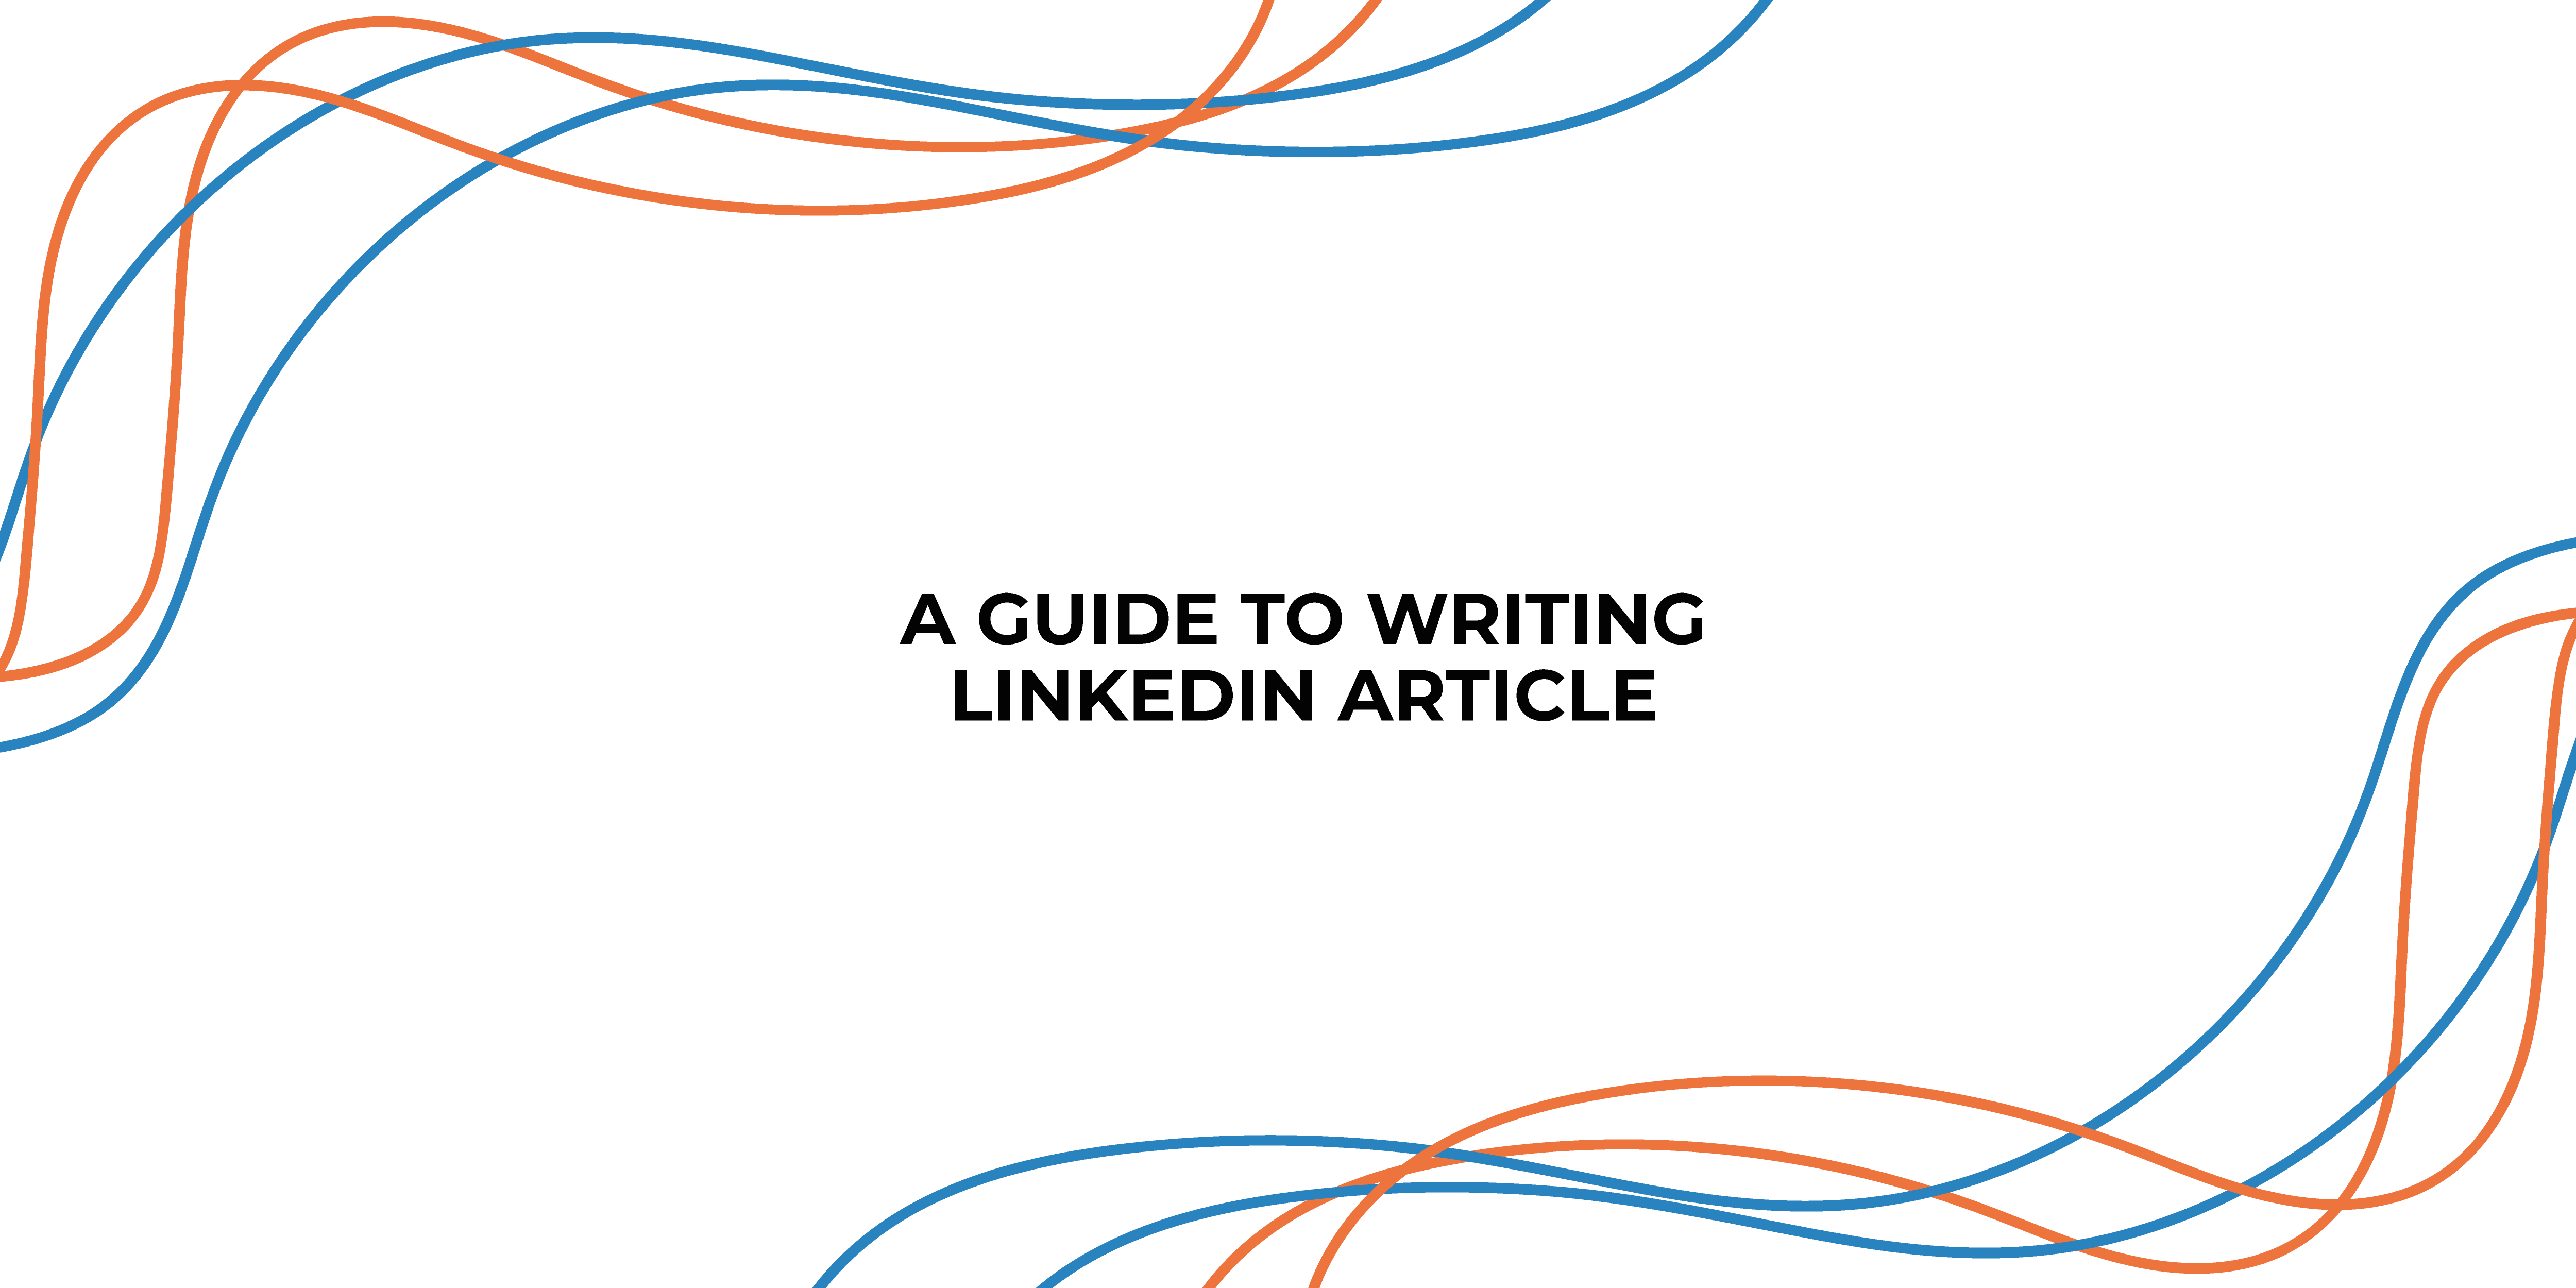 A Guide to Writing LinkedIn Articles